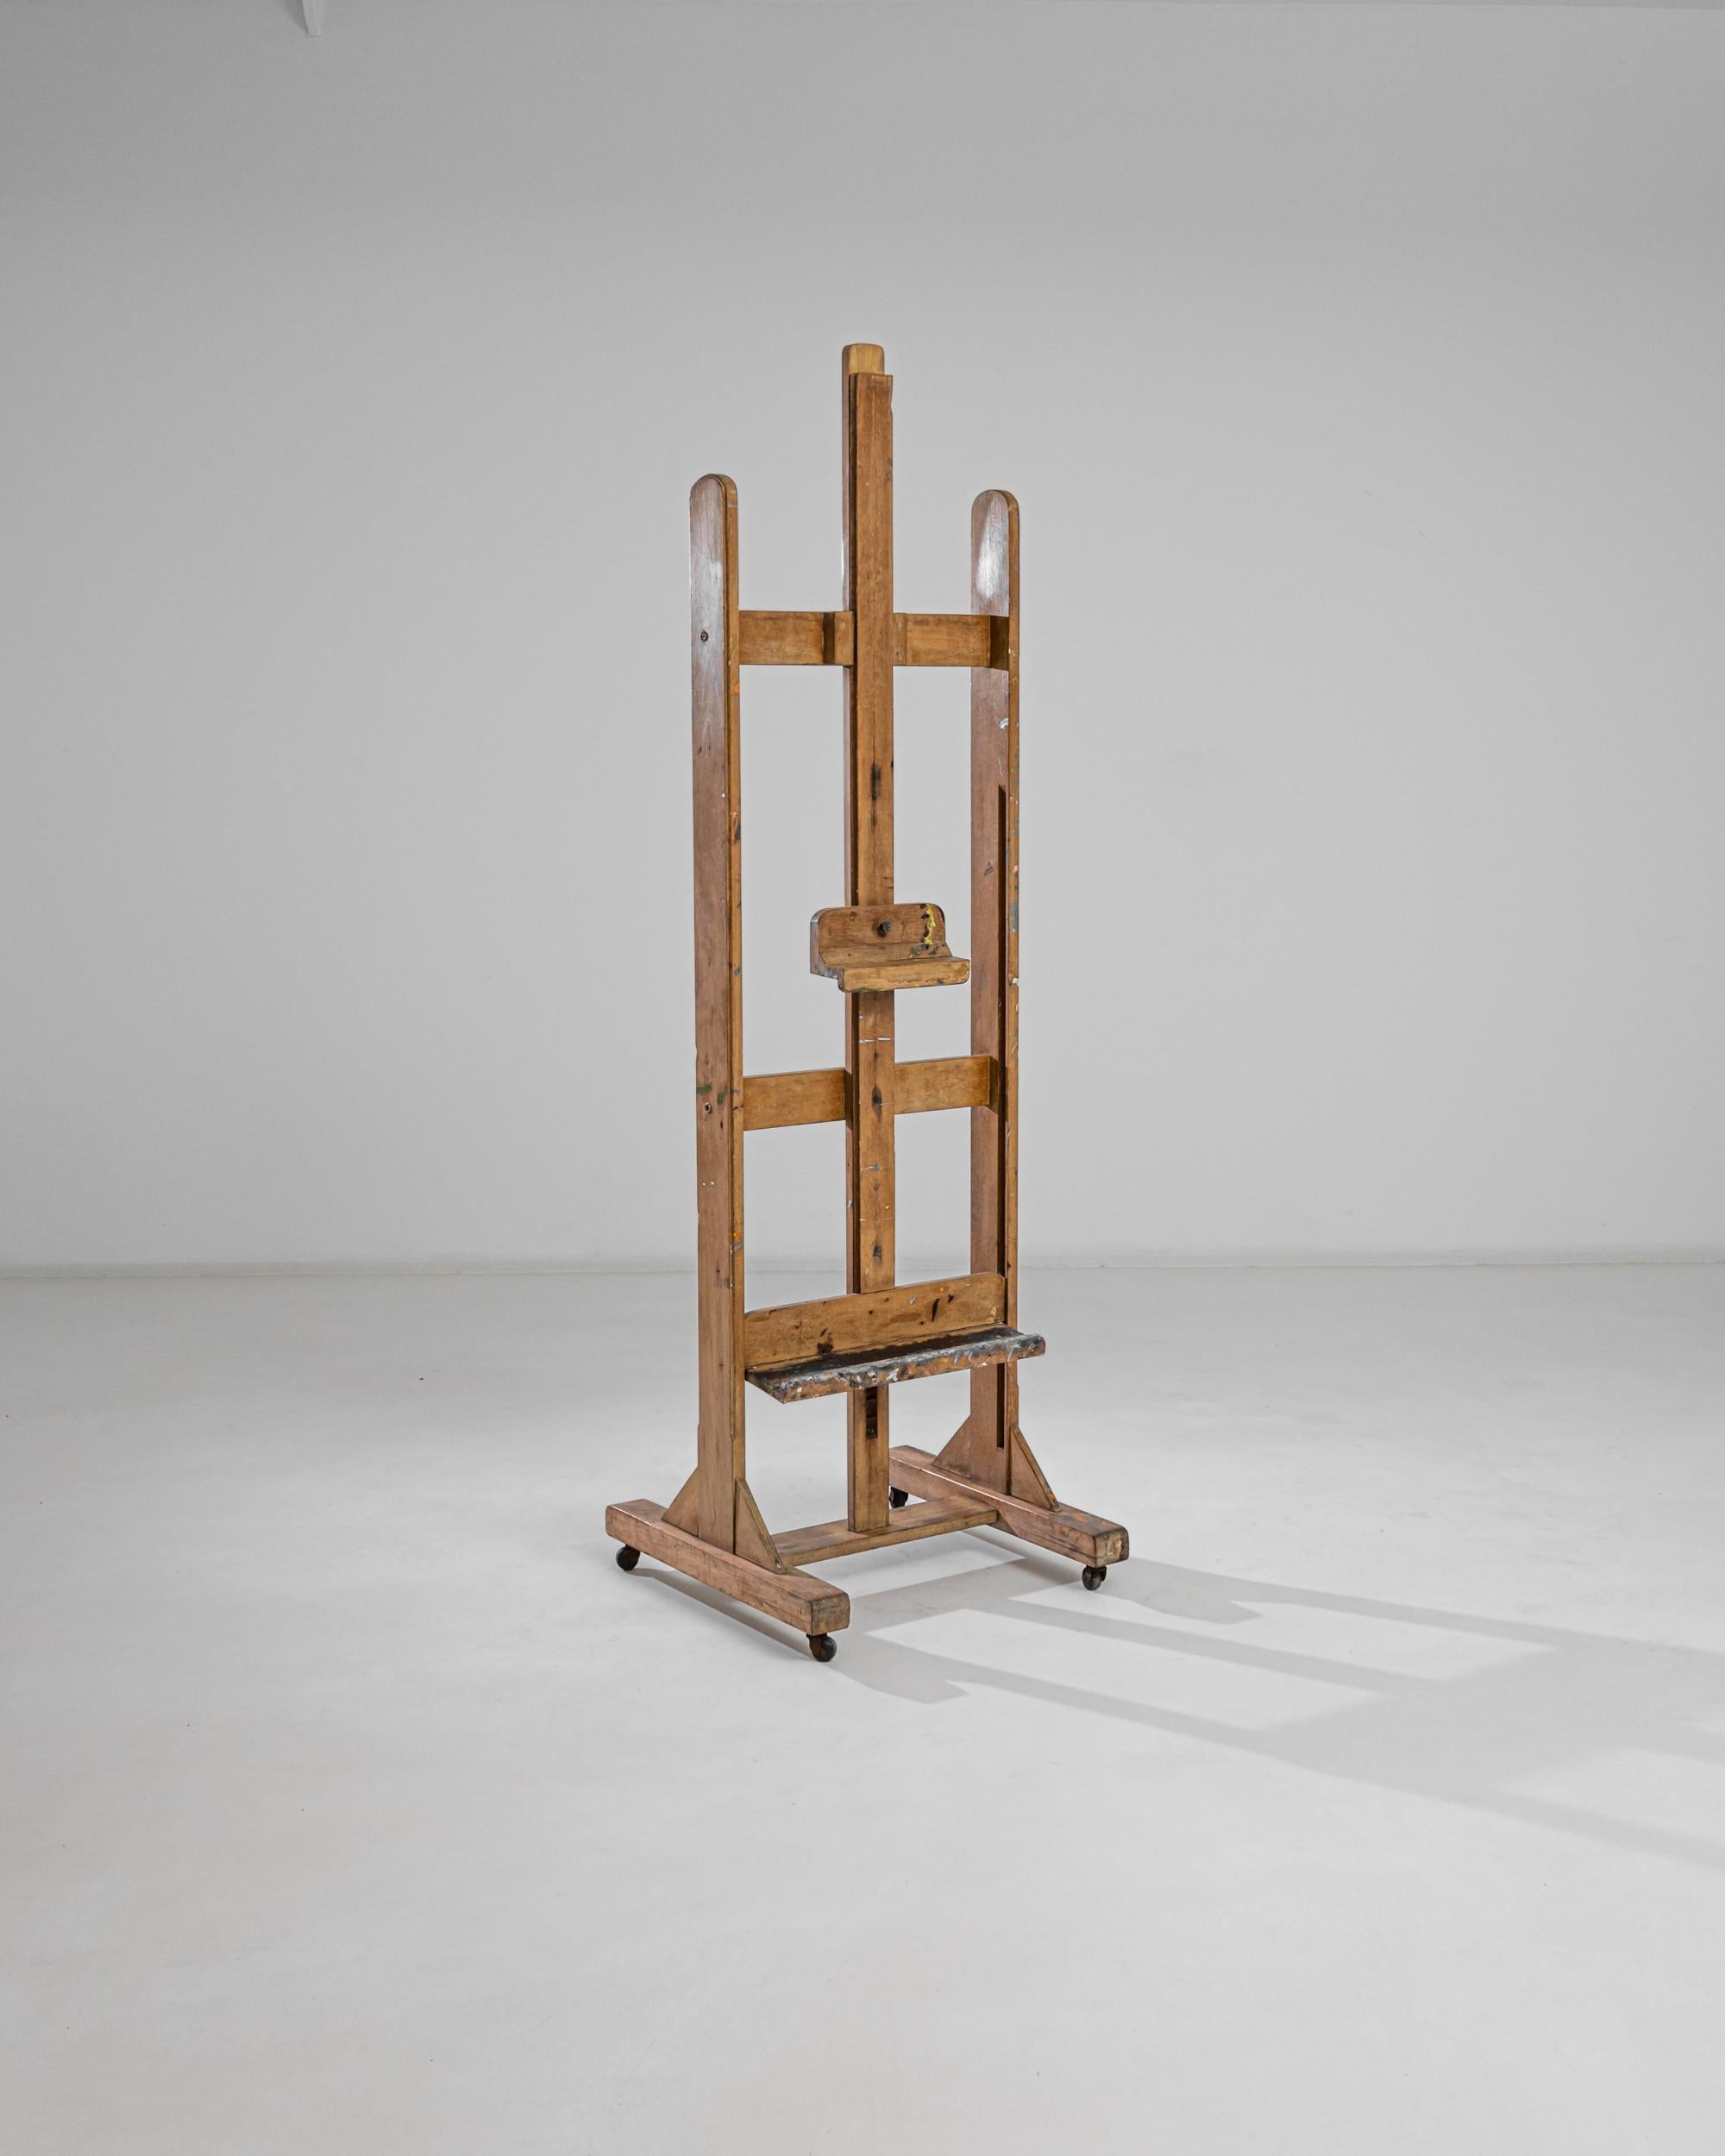 This wooden easel provides a bohemian accent or a practical accessory with a nostalgic touch. Built in Belgium in the 20th century, a pair of adjustable stands allow the frame to accommodate all sizes of canvases and drawing boards, while the